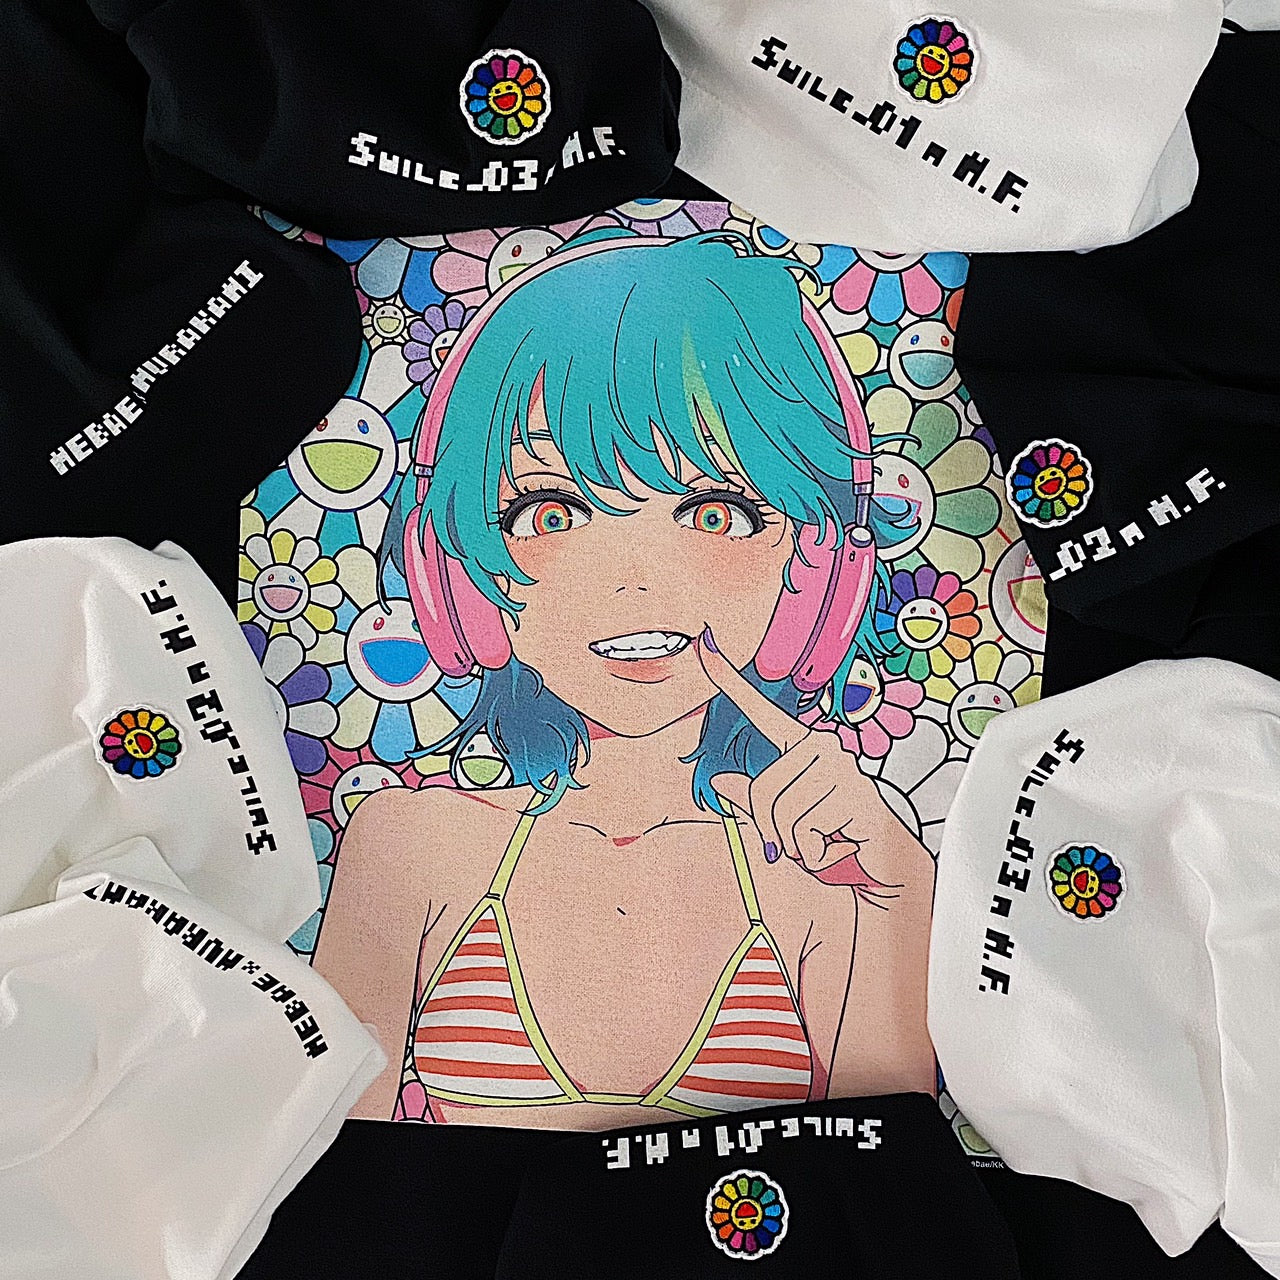 【©Takashi Murakami / kaikai kiki】<br> The T-shirt of the popular collaboration work "smile MF" with mebae will be pre-sold online today from 20:00 on 7/10 (Mon.)!